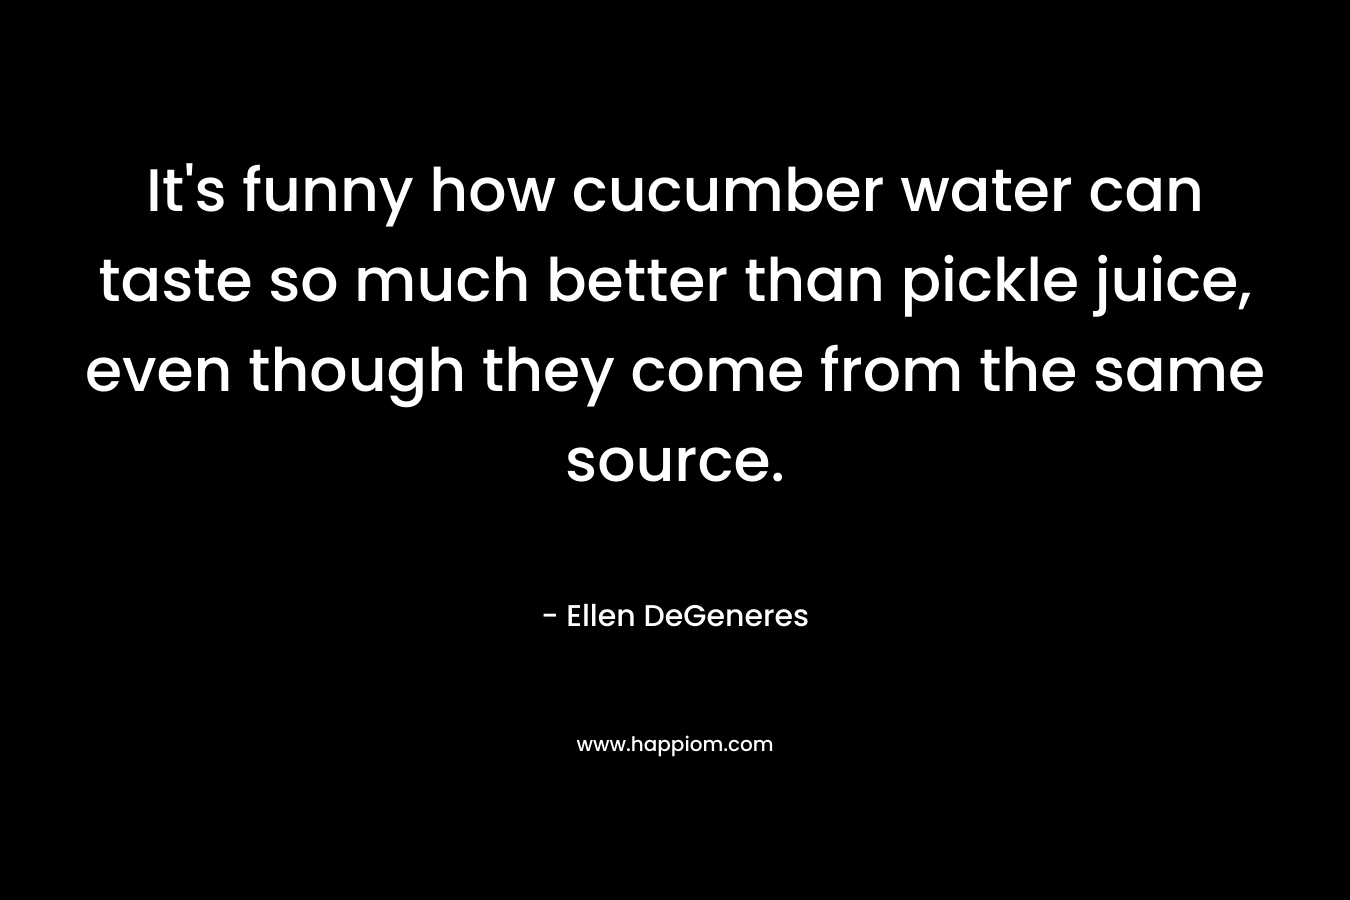 It’s funny how cucumber water can taste so much better than pickle juice, even though they come from the same source. – Ellen DeGeneres